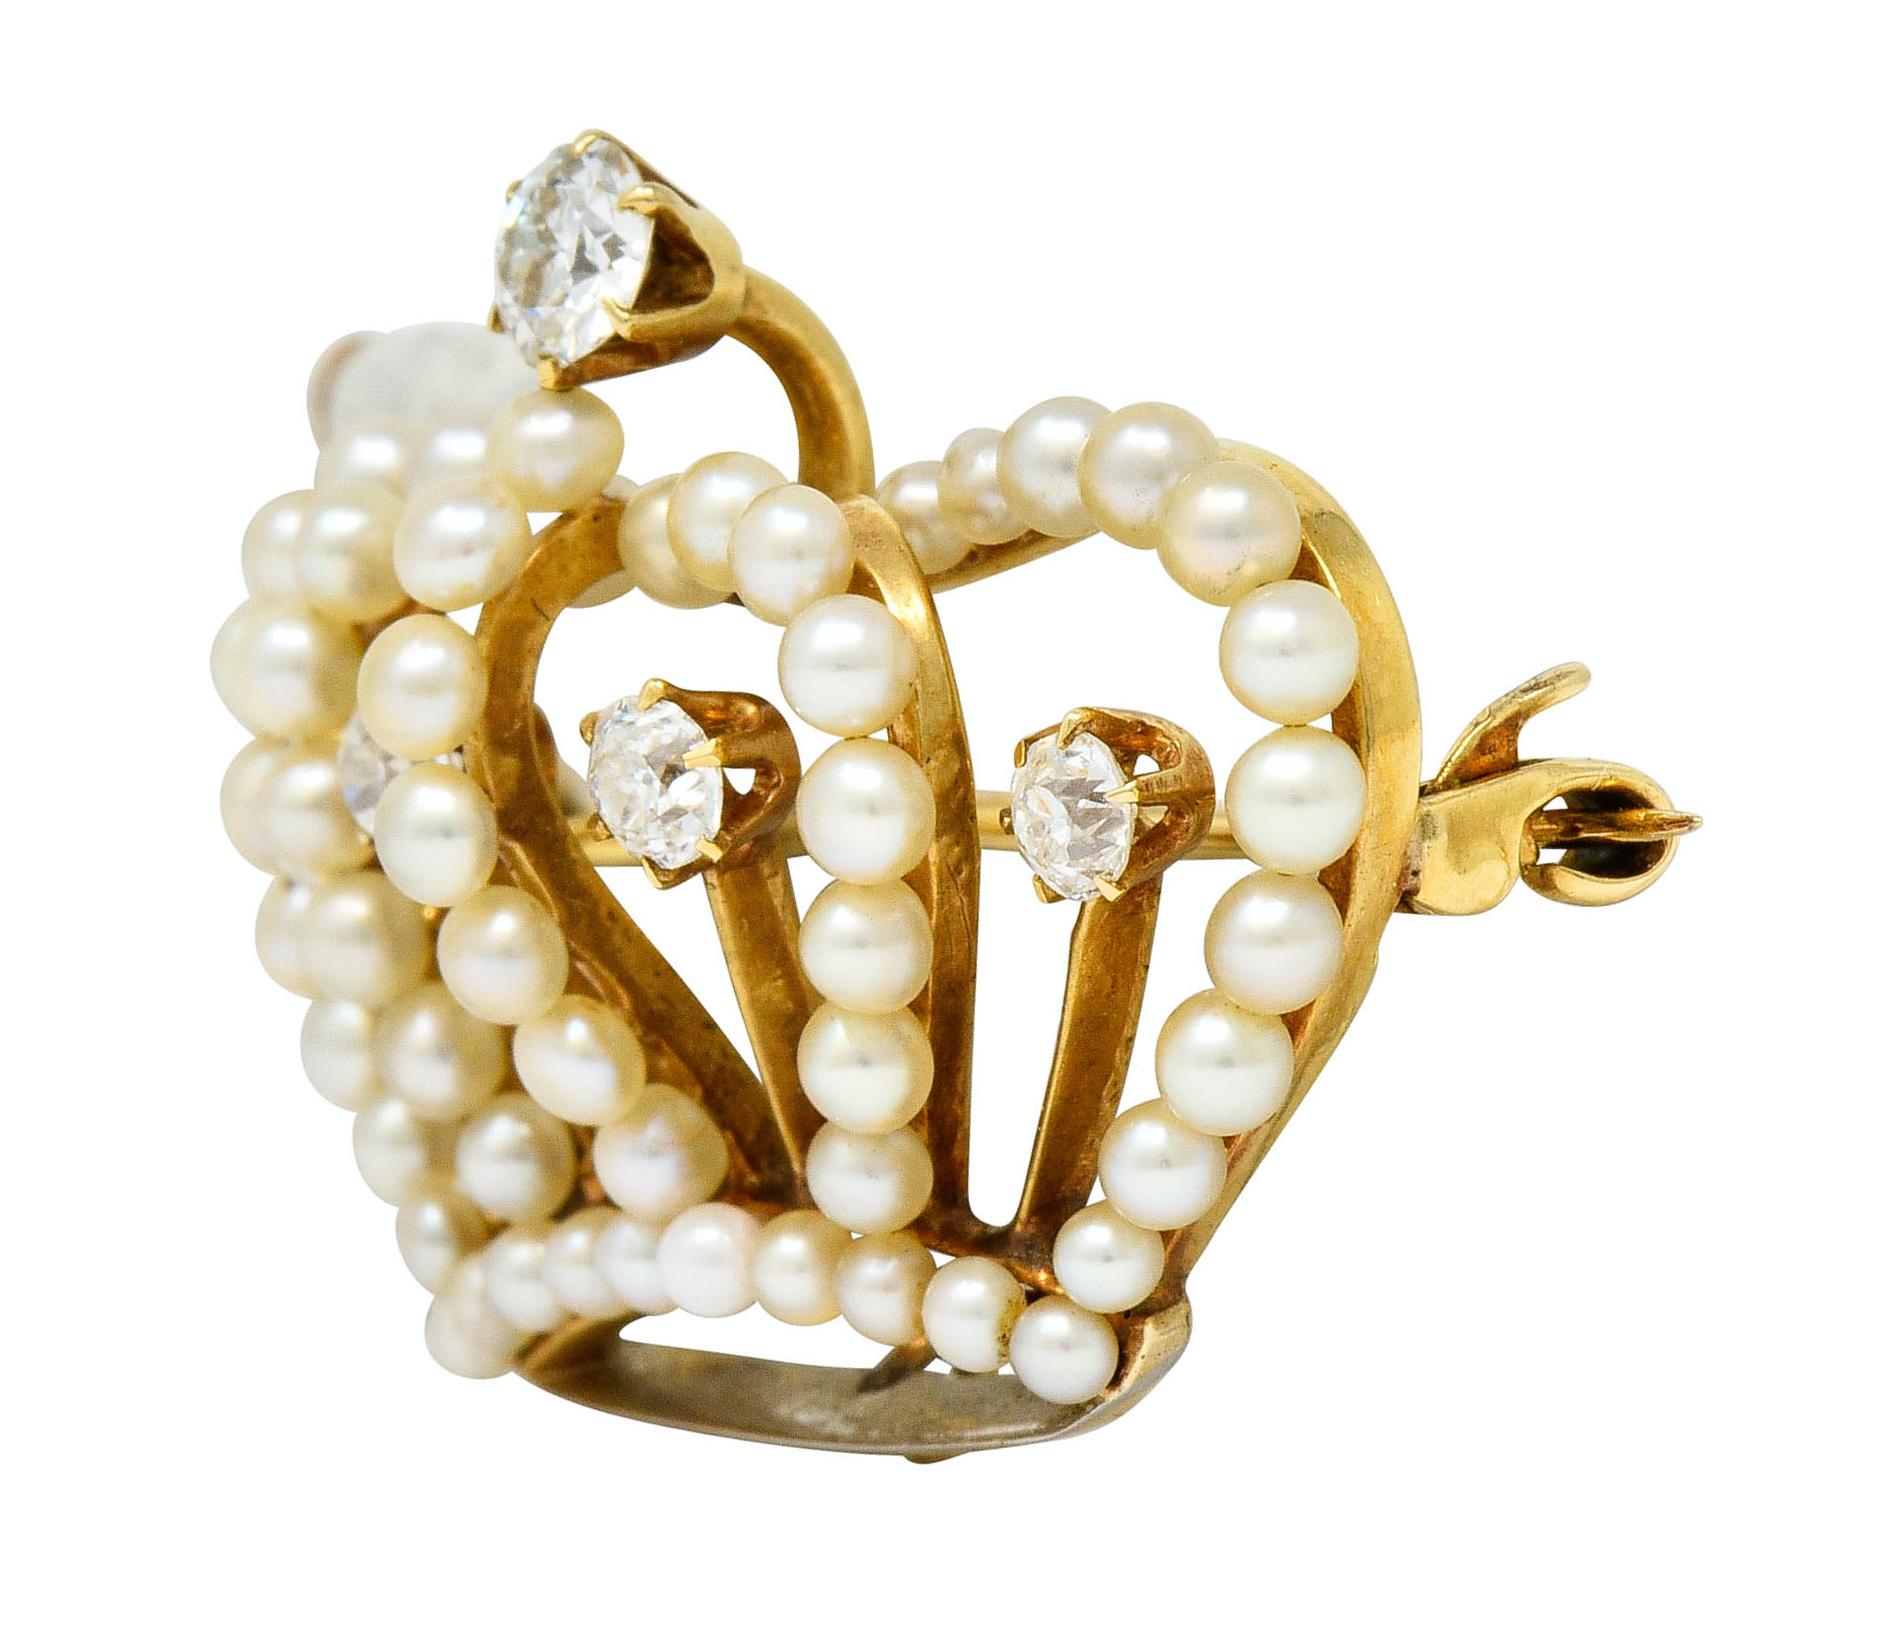 Pendant brooch designed as a dimensional crown with its outline comprised of natural pearls that measure 2.0 to 2.5 mm

With well-matched cream body color and excellent luster with some silver and rosè overtones

Four tines and top of crown accented